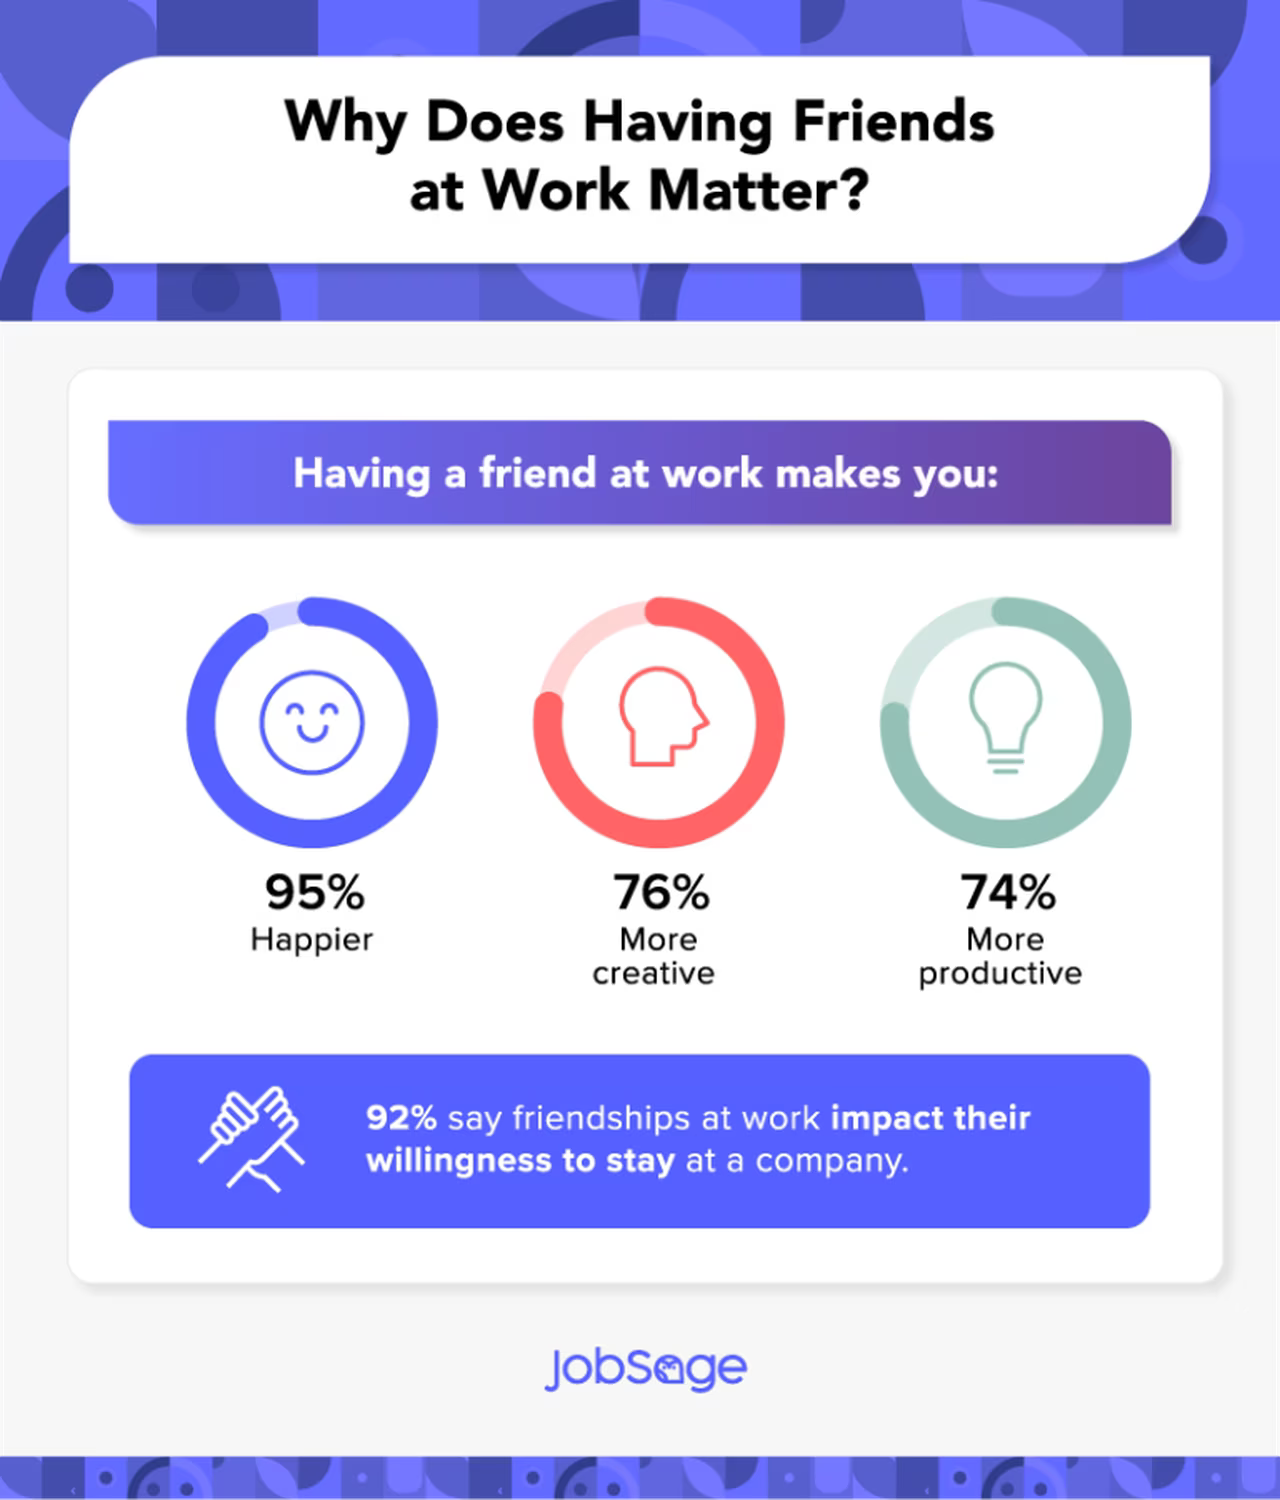 An infographic that shows the importance of having friends at work, highlighting how friendship makes 95% of employees happier. 